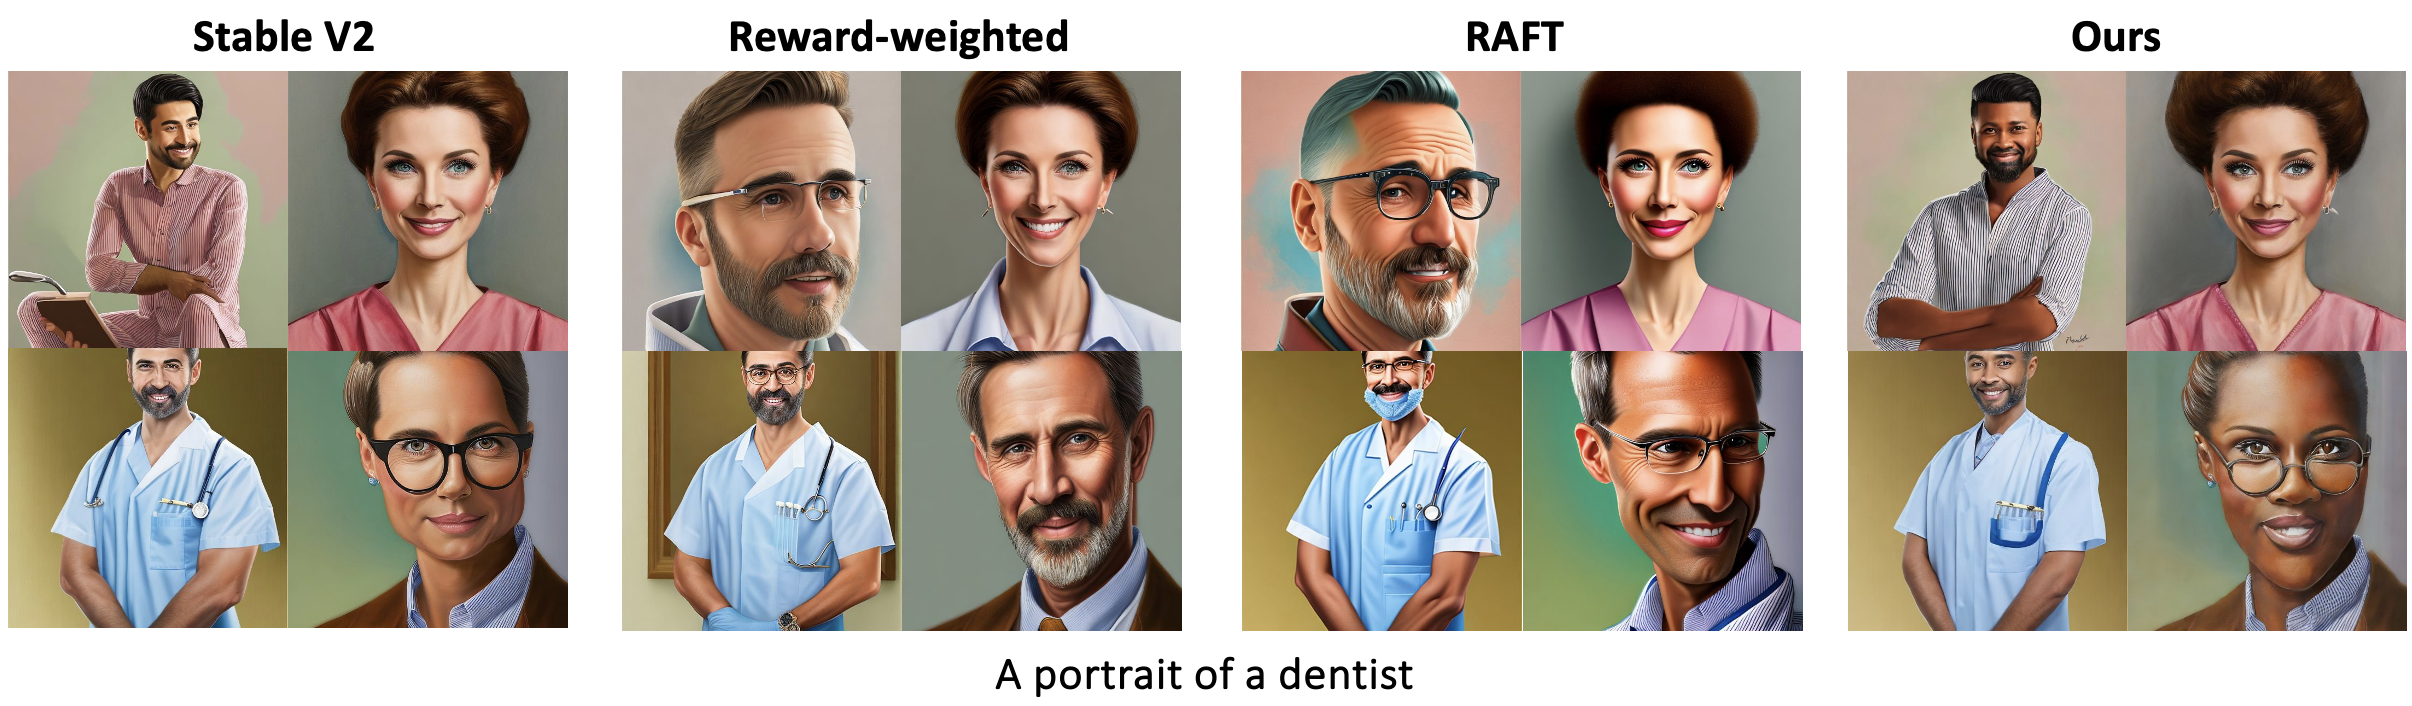 A portrait of a dentist